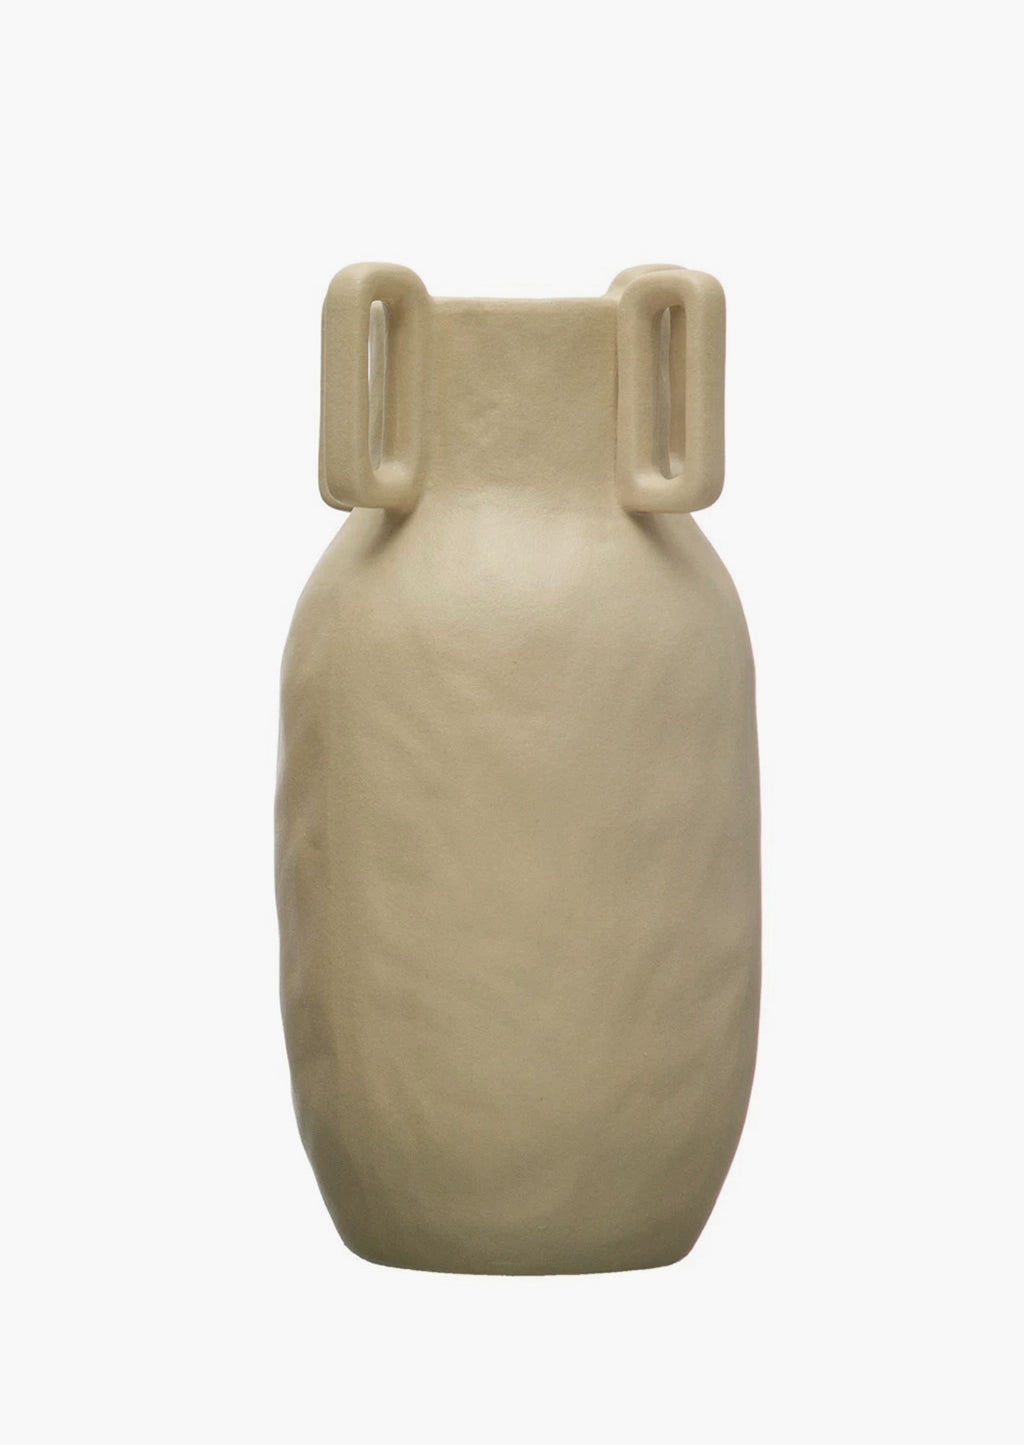 3: A sand color vase in matte ceramic with decorative square handle detail around mouth.